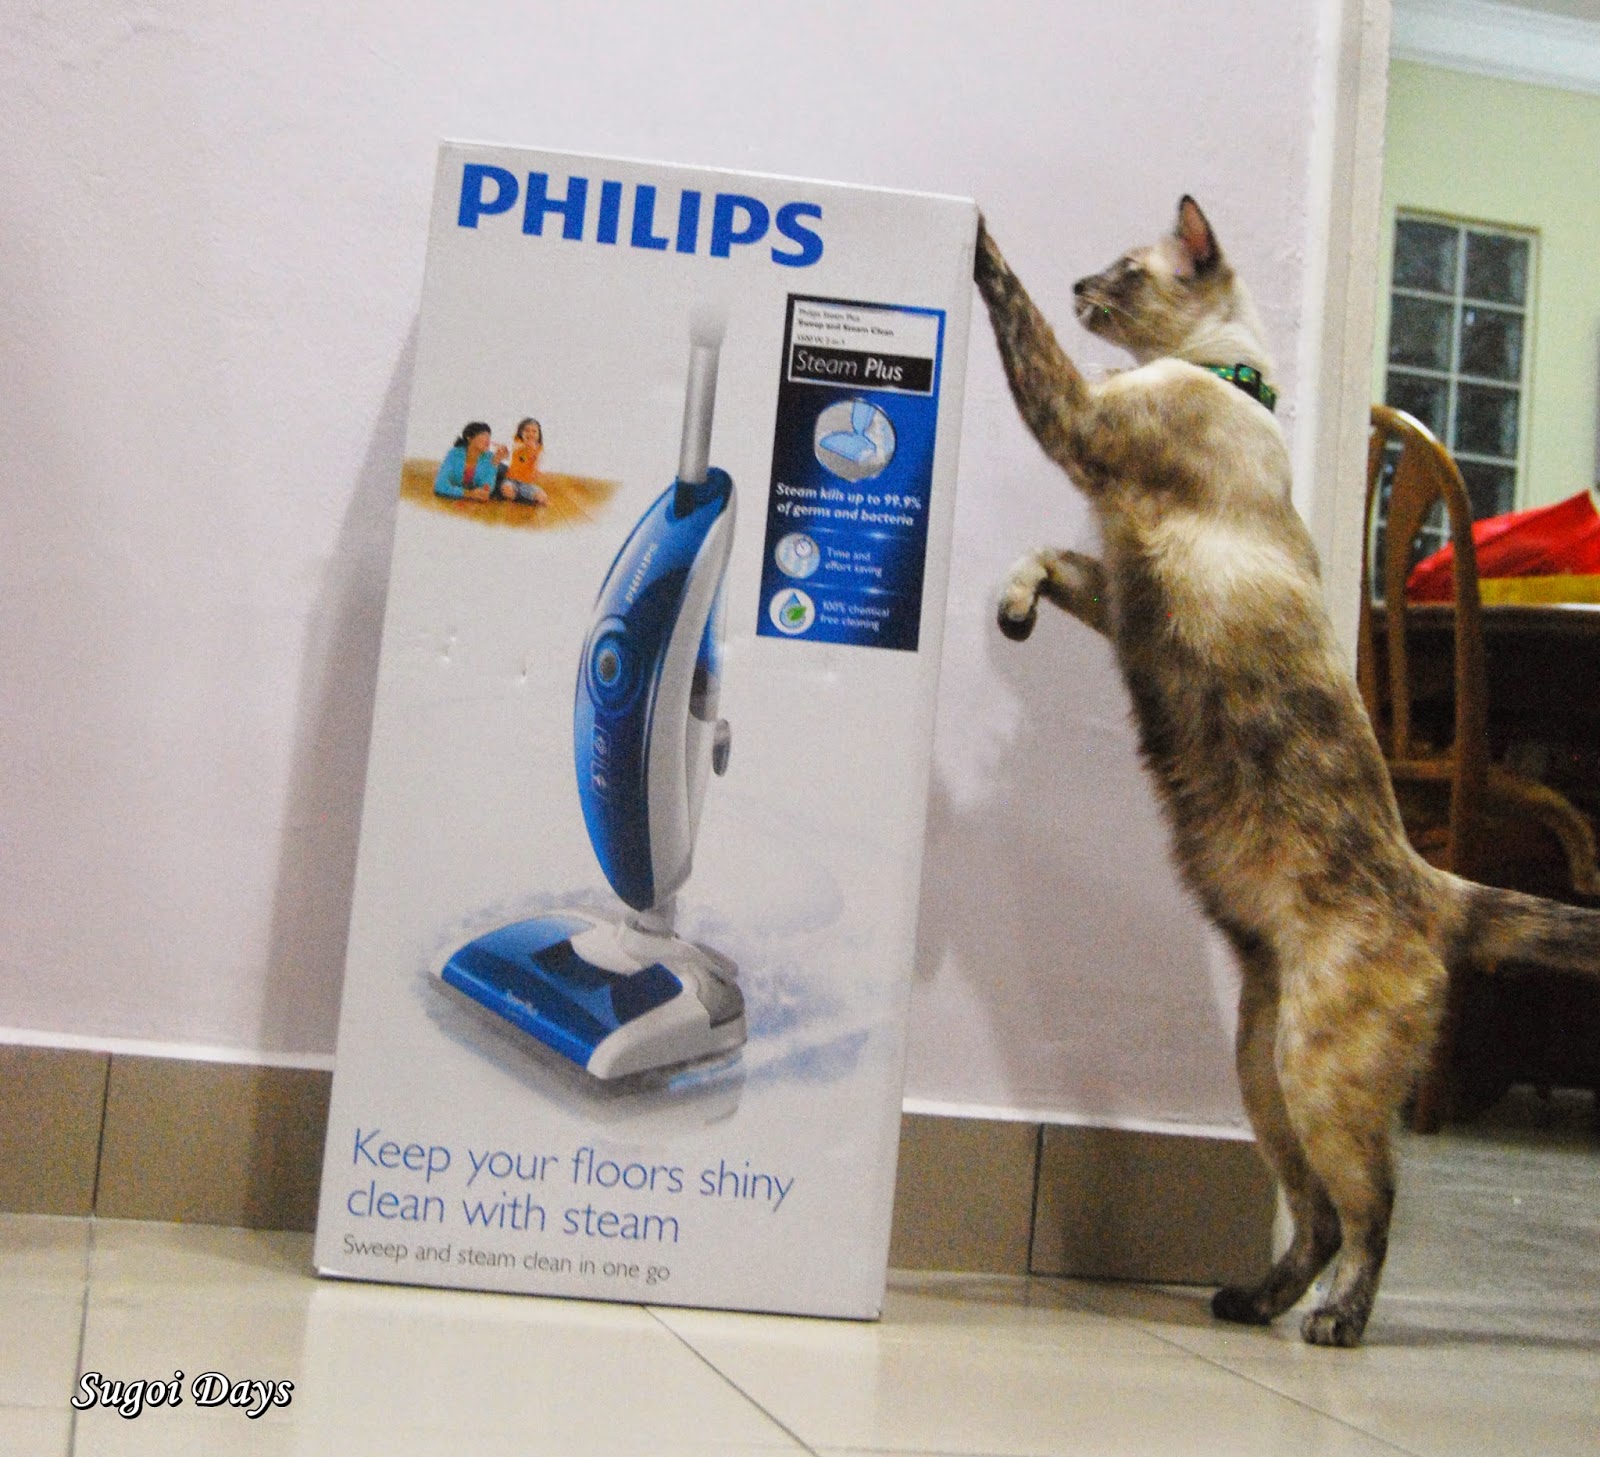 professional Expanding name Sugoi Days: Philips Steam Plus 2-in-1 Sweep and Steam Cleaner review